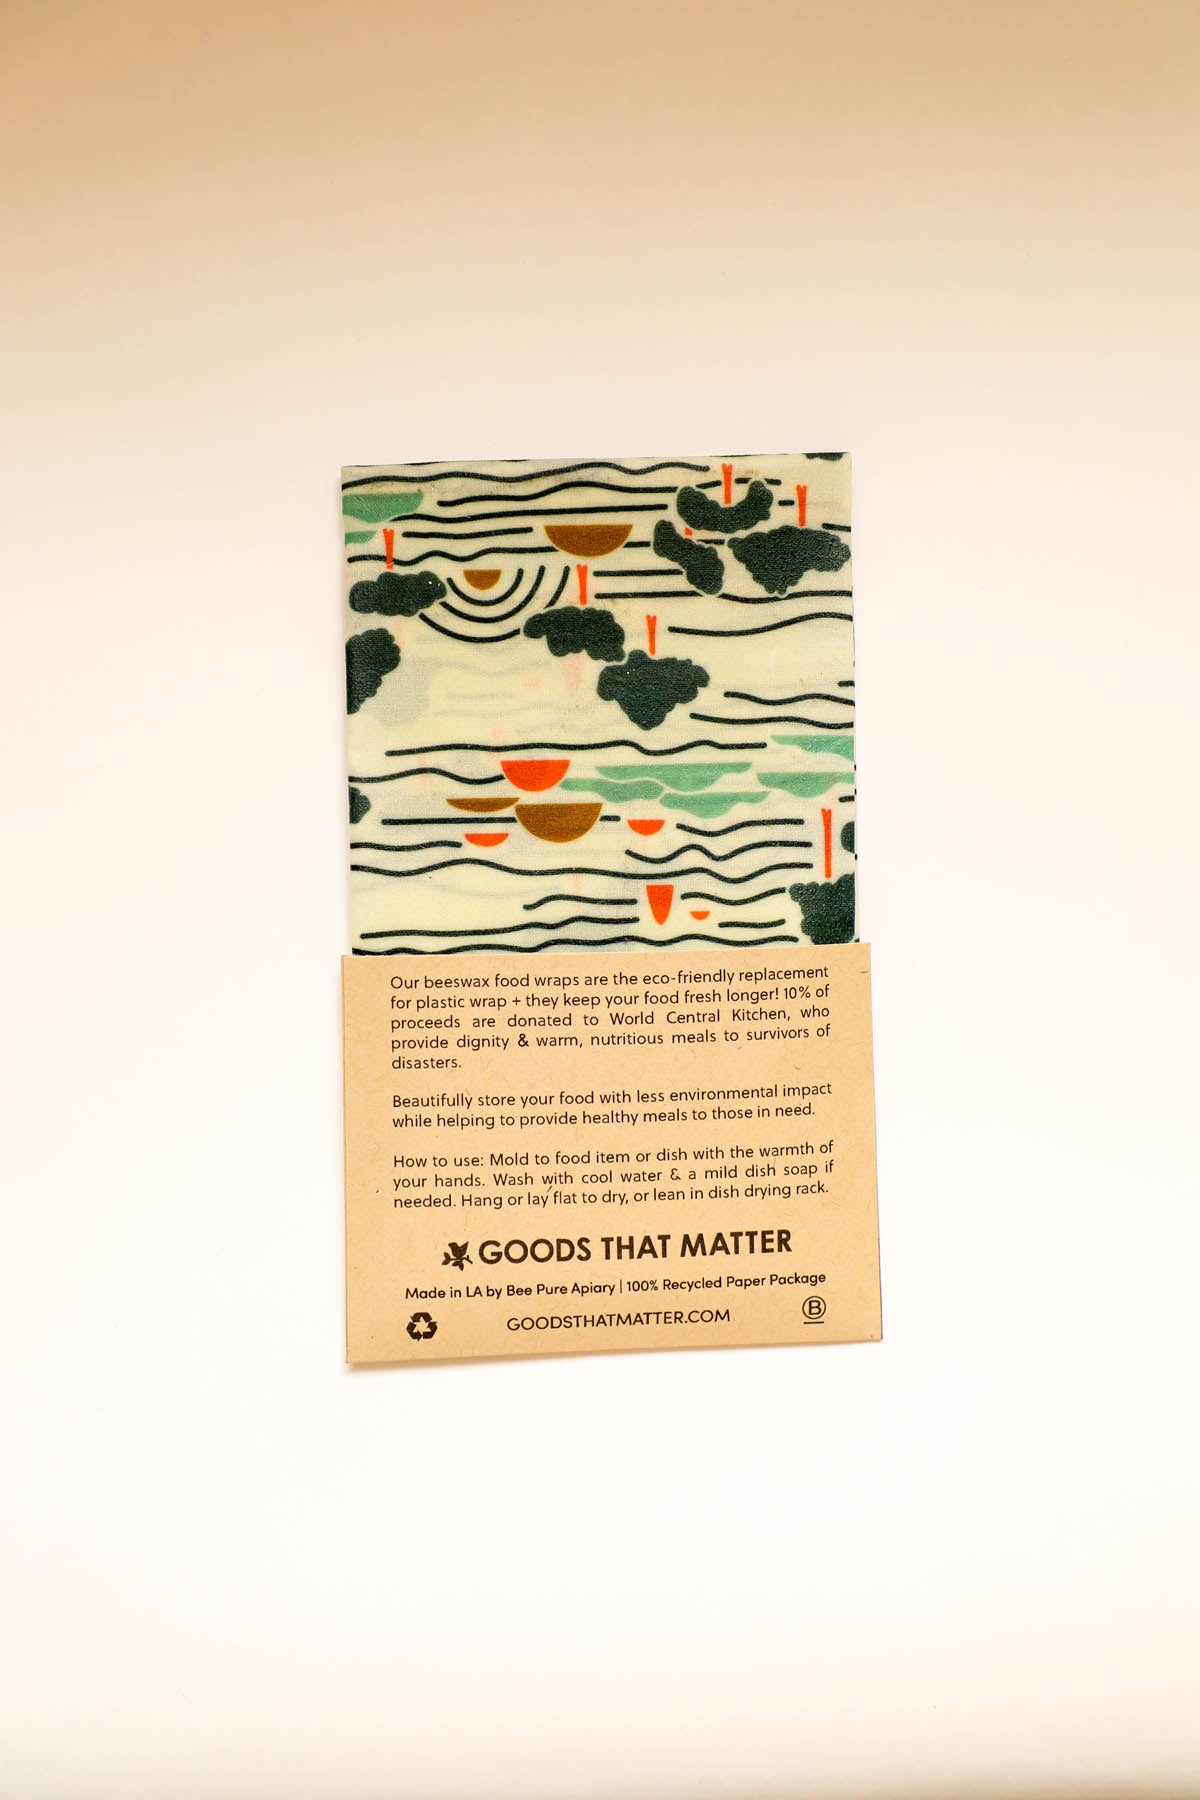 Beeswax Food Wraps - Let's Get Outside Set, Organic Cotton, gives to World Central Kitchen